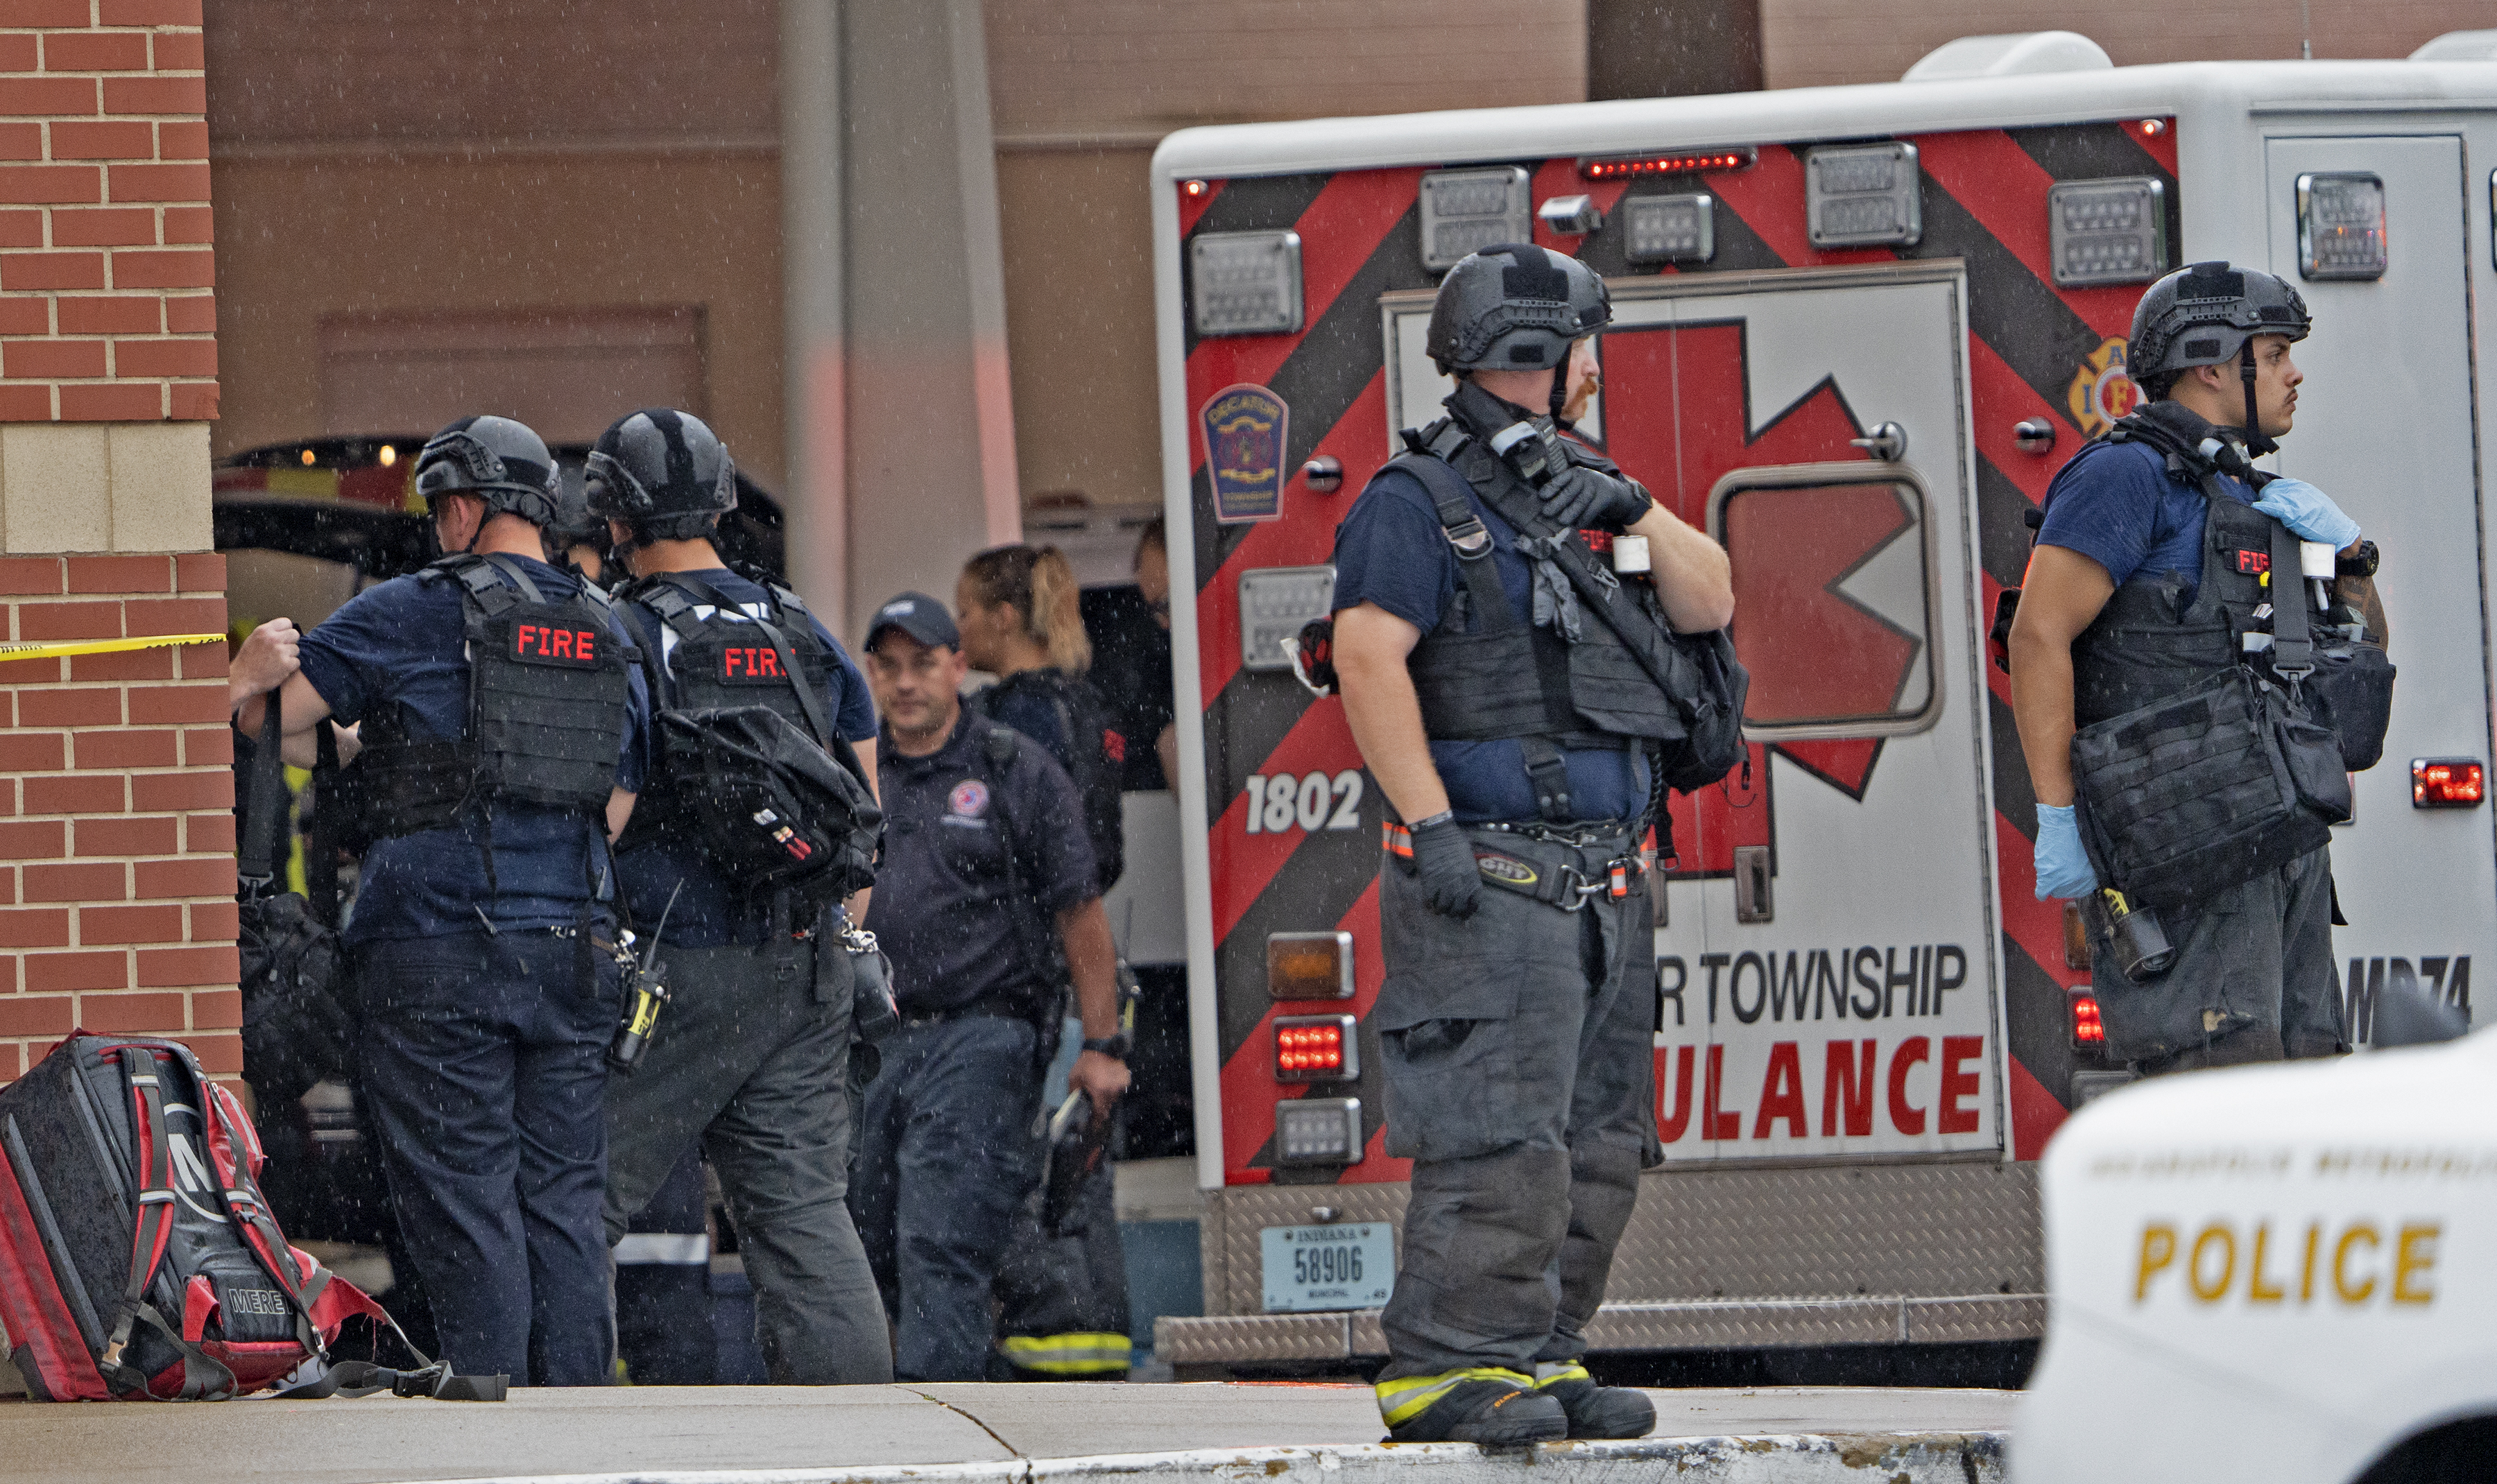 3 Dead in Another Mall Shooting, This Time in Indiana. Witness Kills Gunman